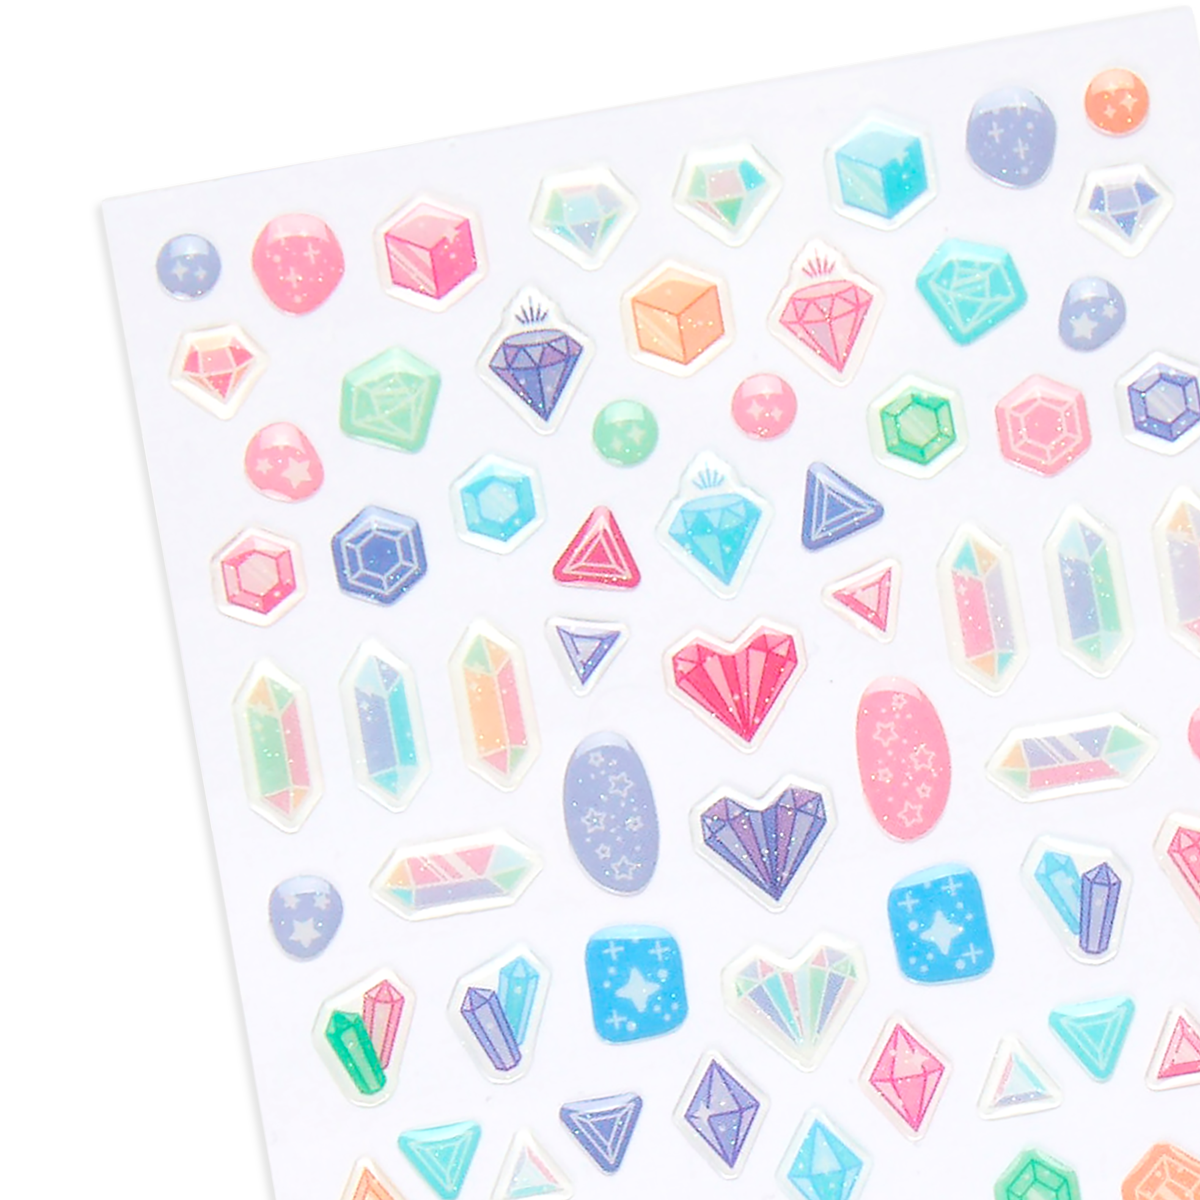 OOLY Stickiville Candy Shoppe Glitter Stickers